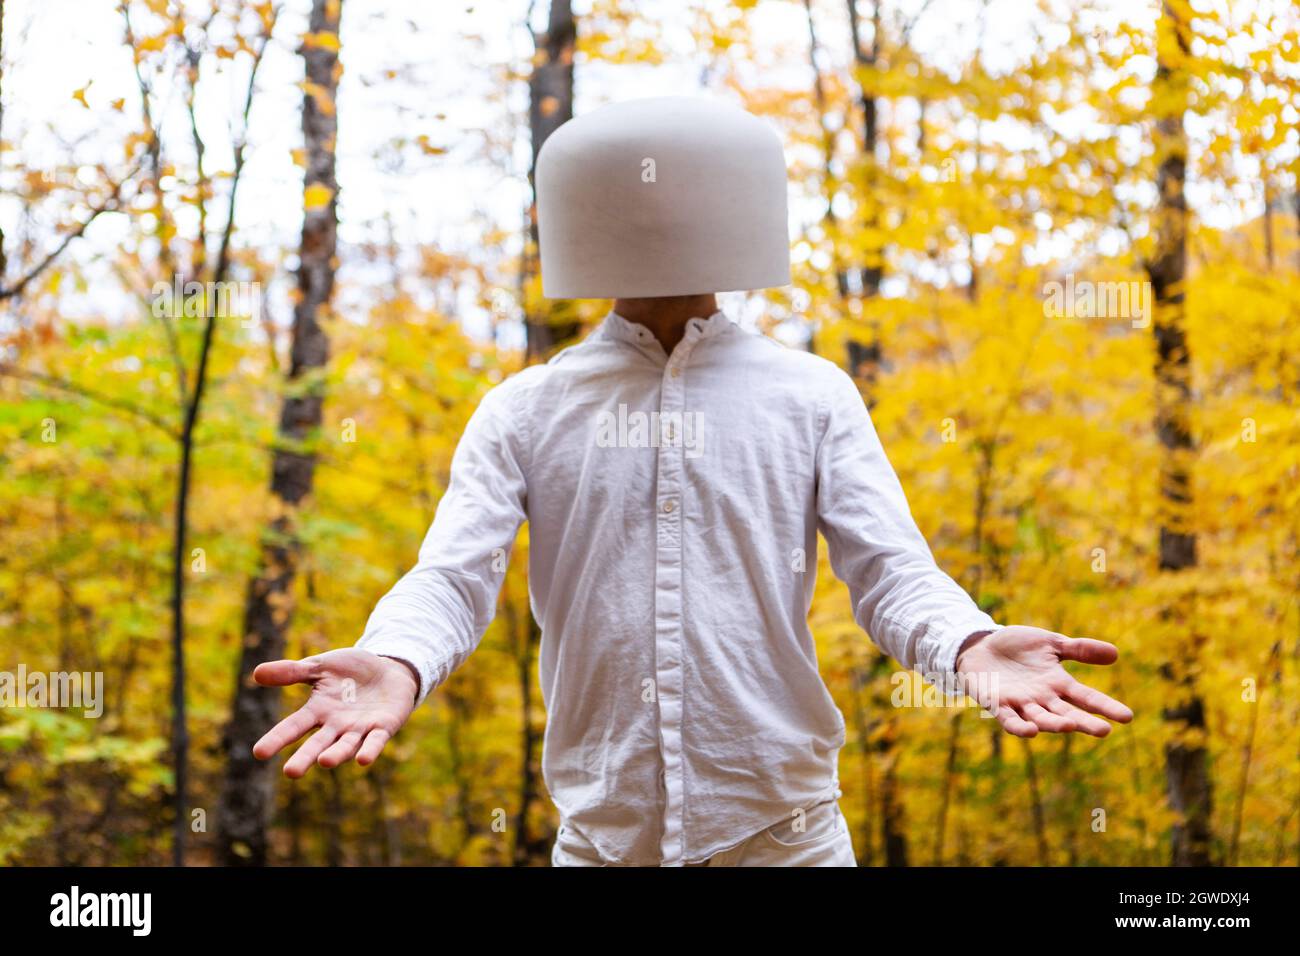 Man Wearing Bowl On Head Against Trees Stock Photo - Alamy